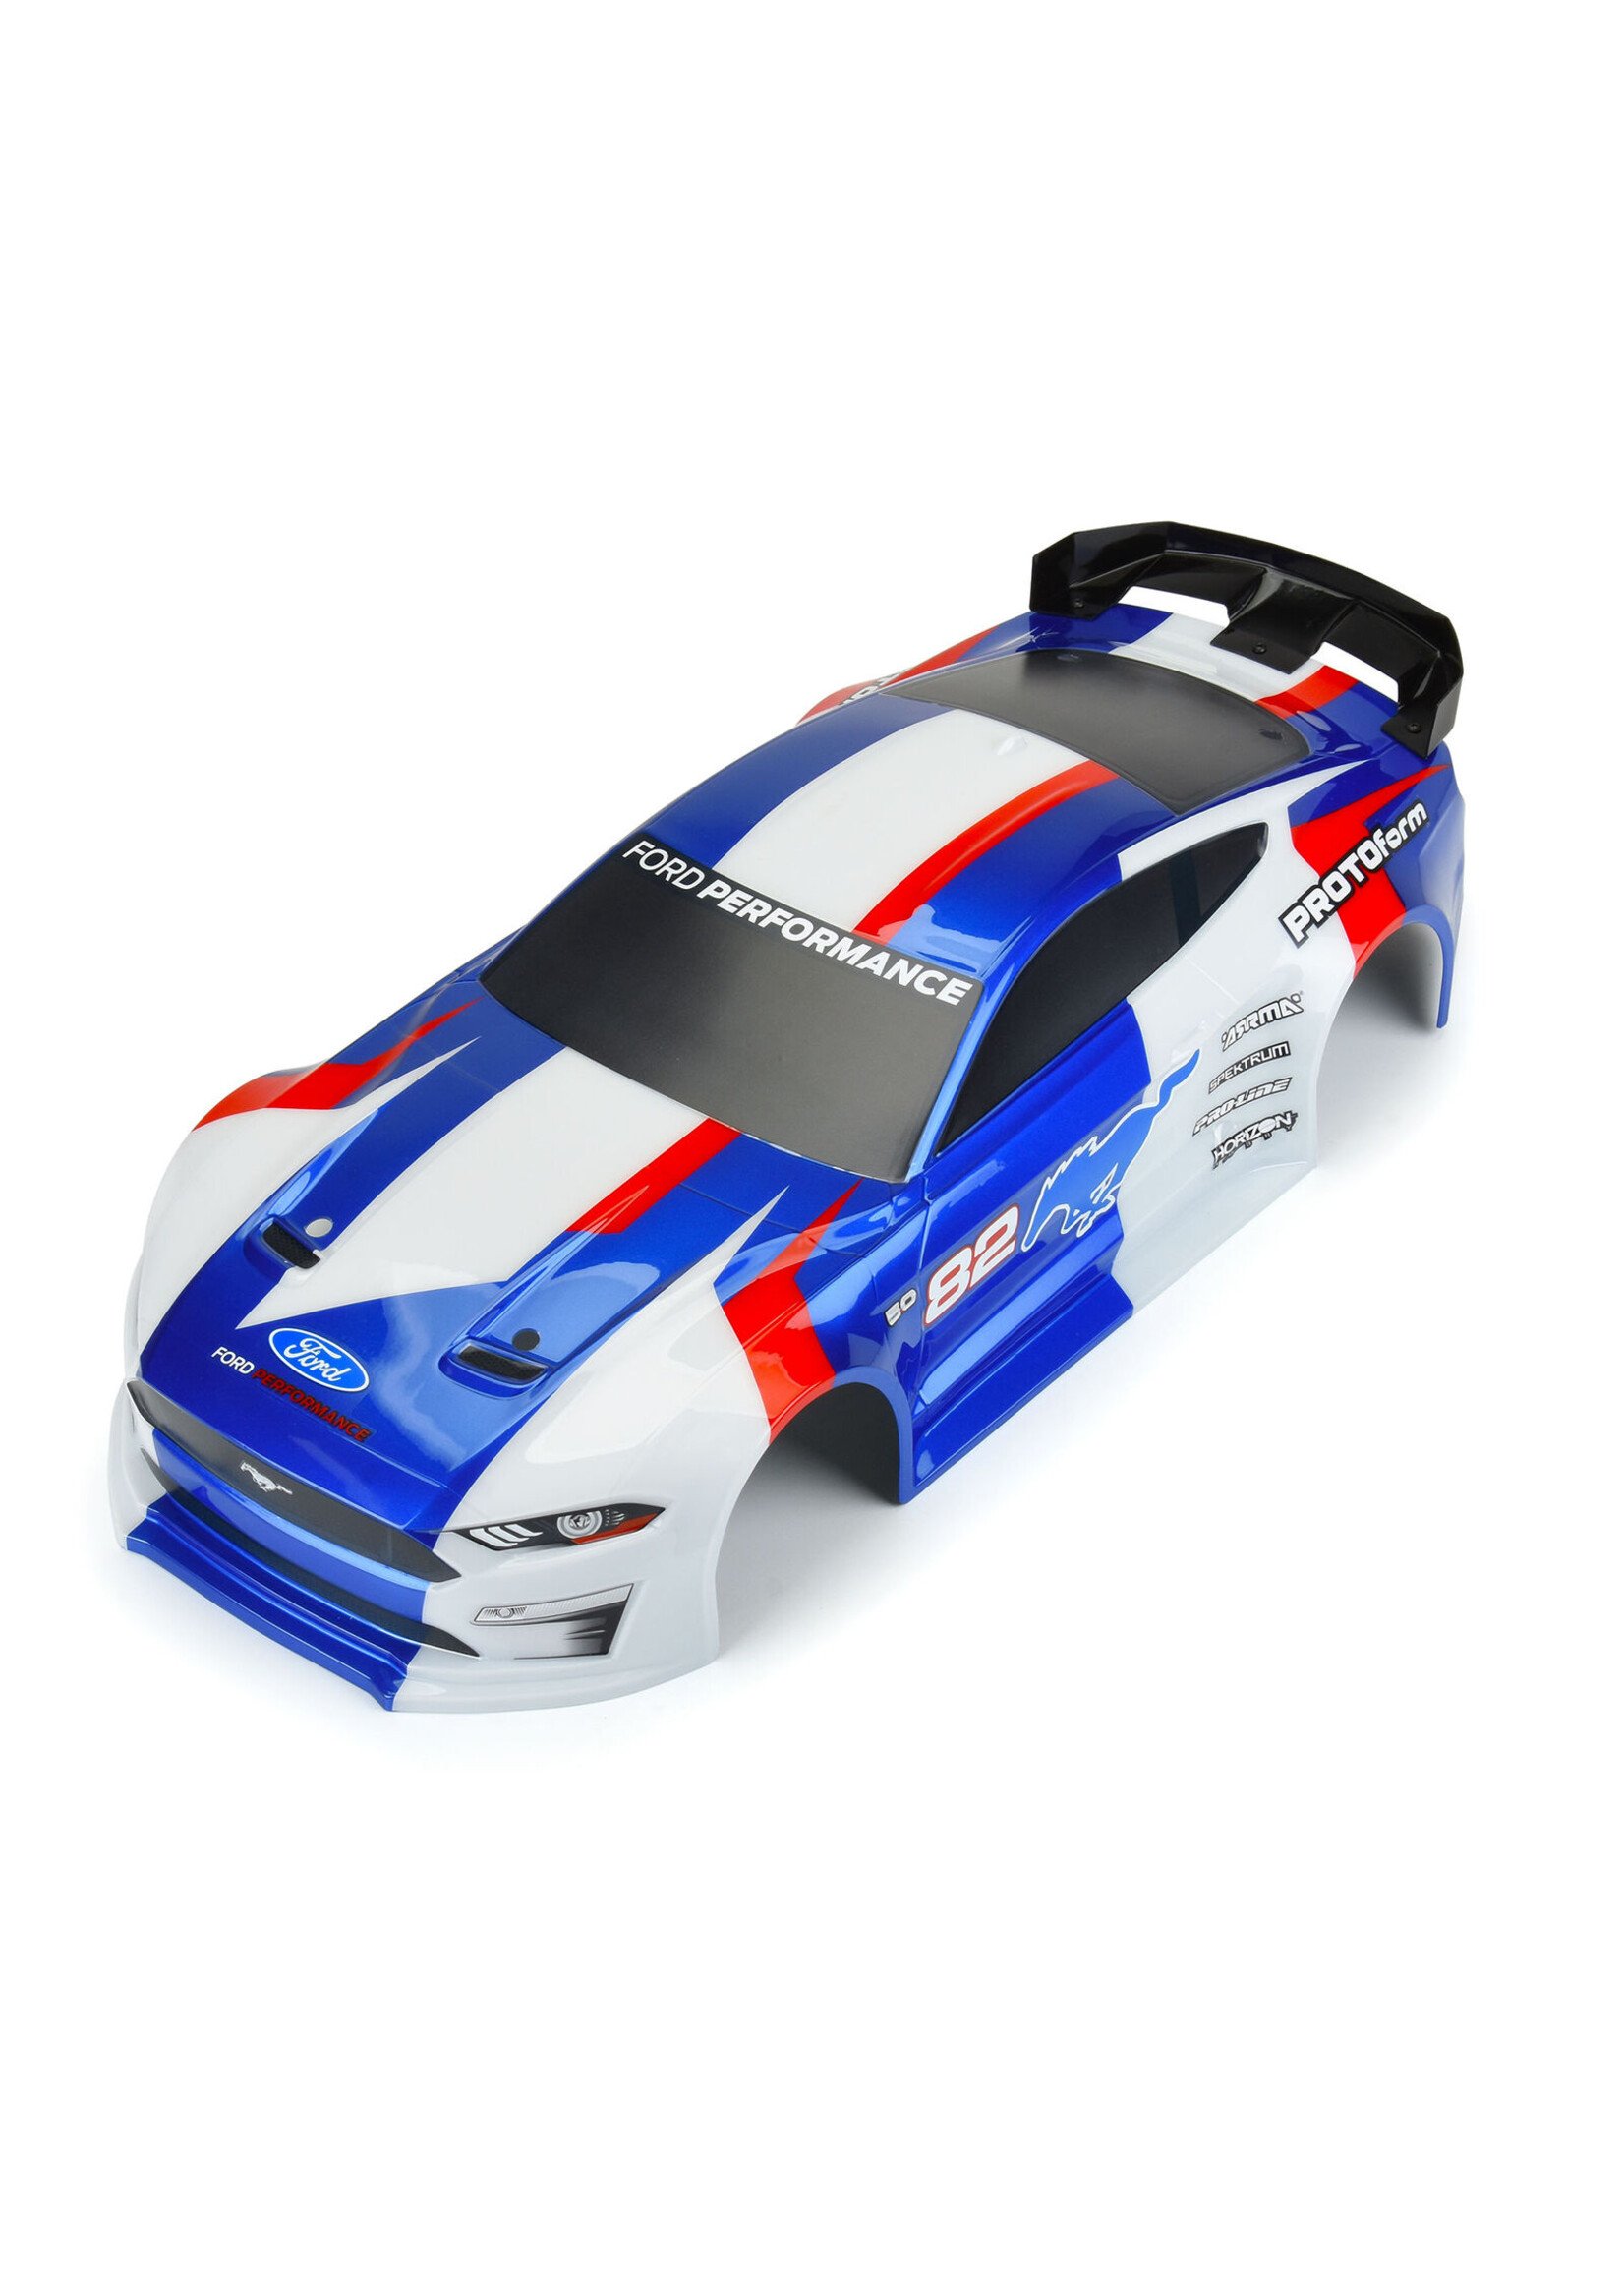 Protoform 1/8 Vendetta/Infraction 3S 2021 Ford Mustang Painted Body - Blue